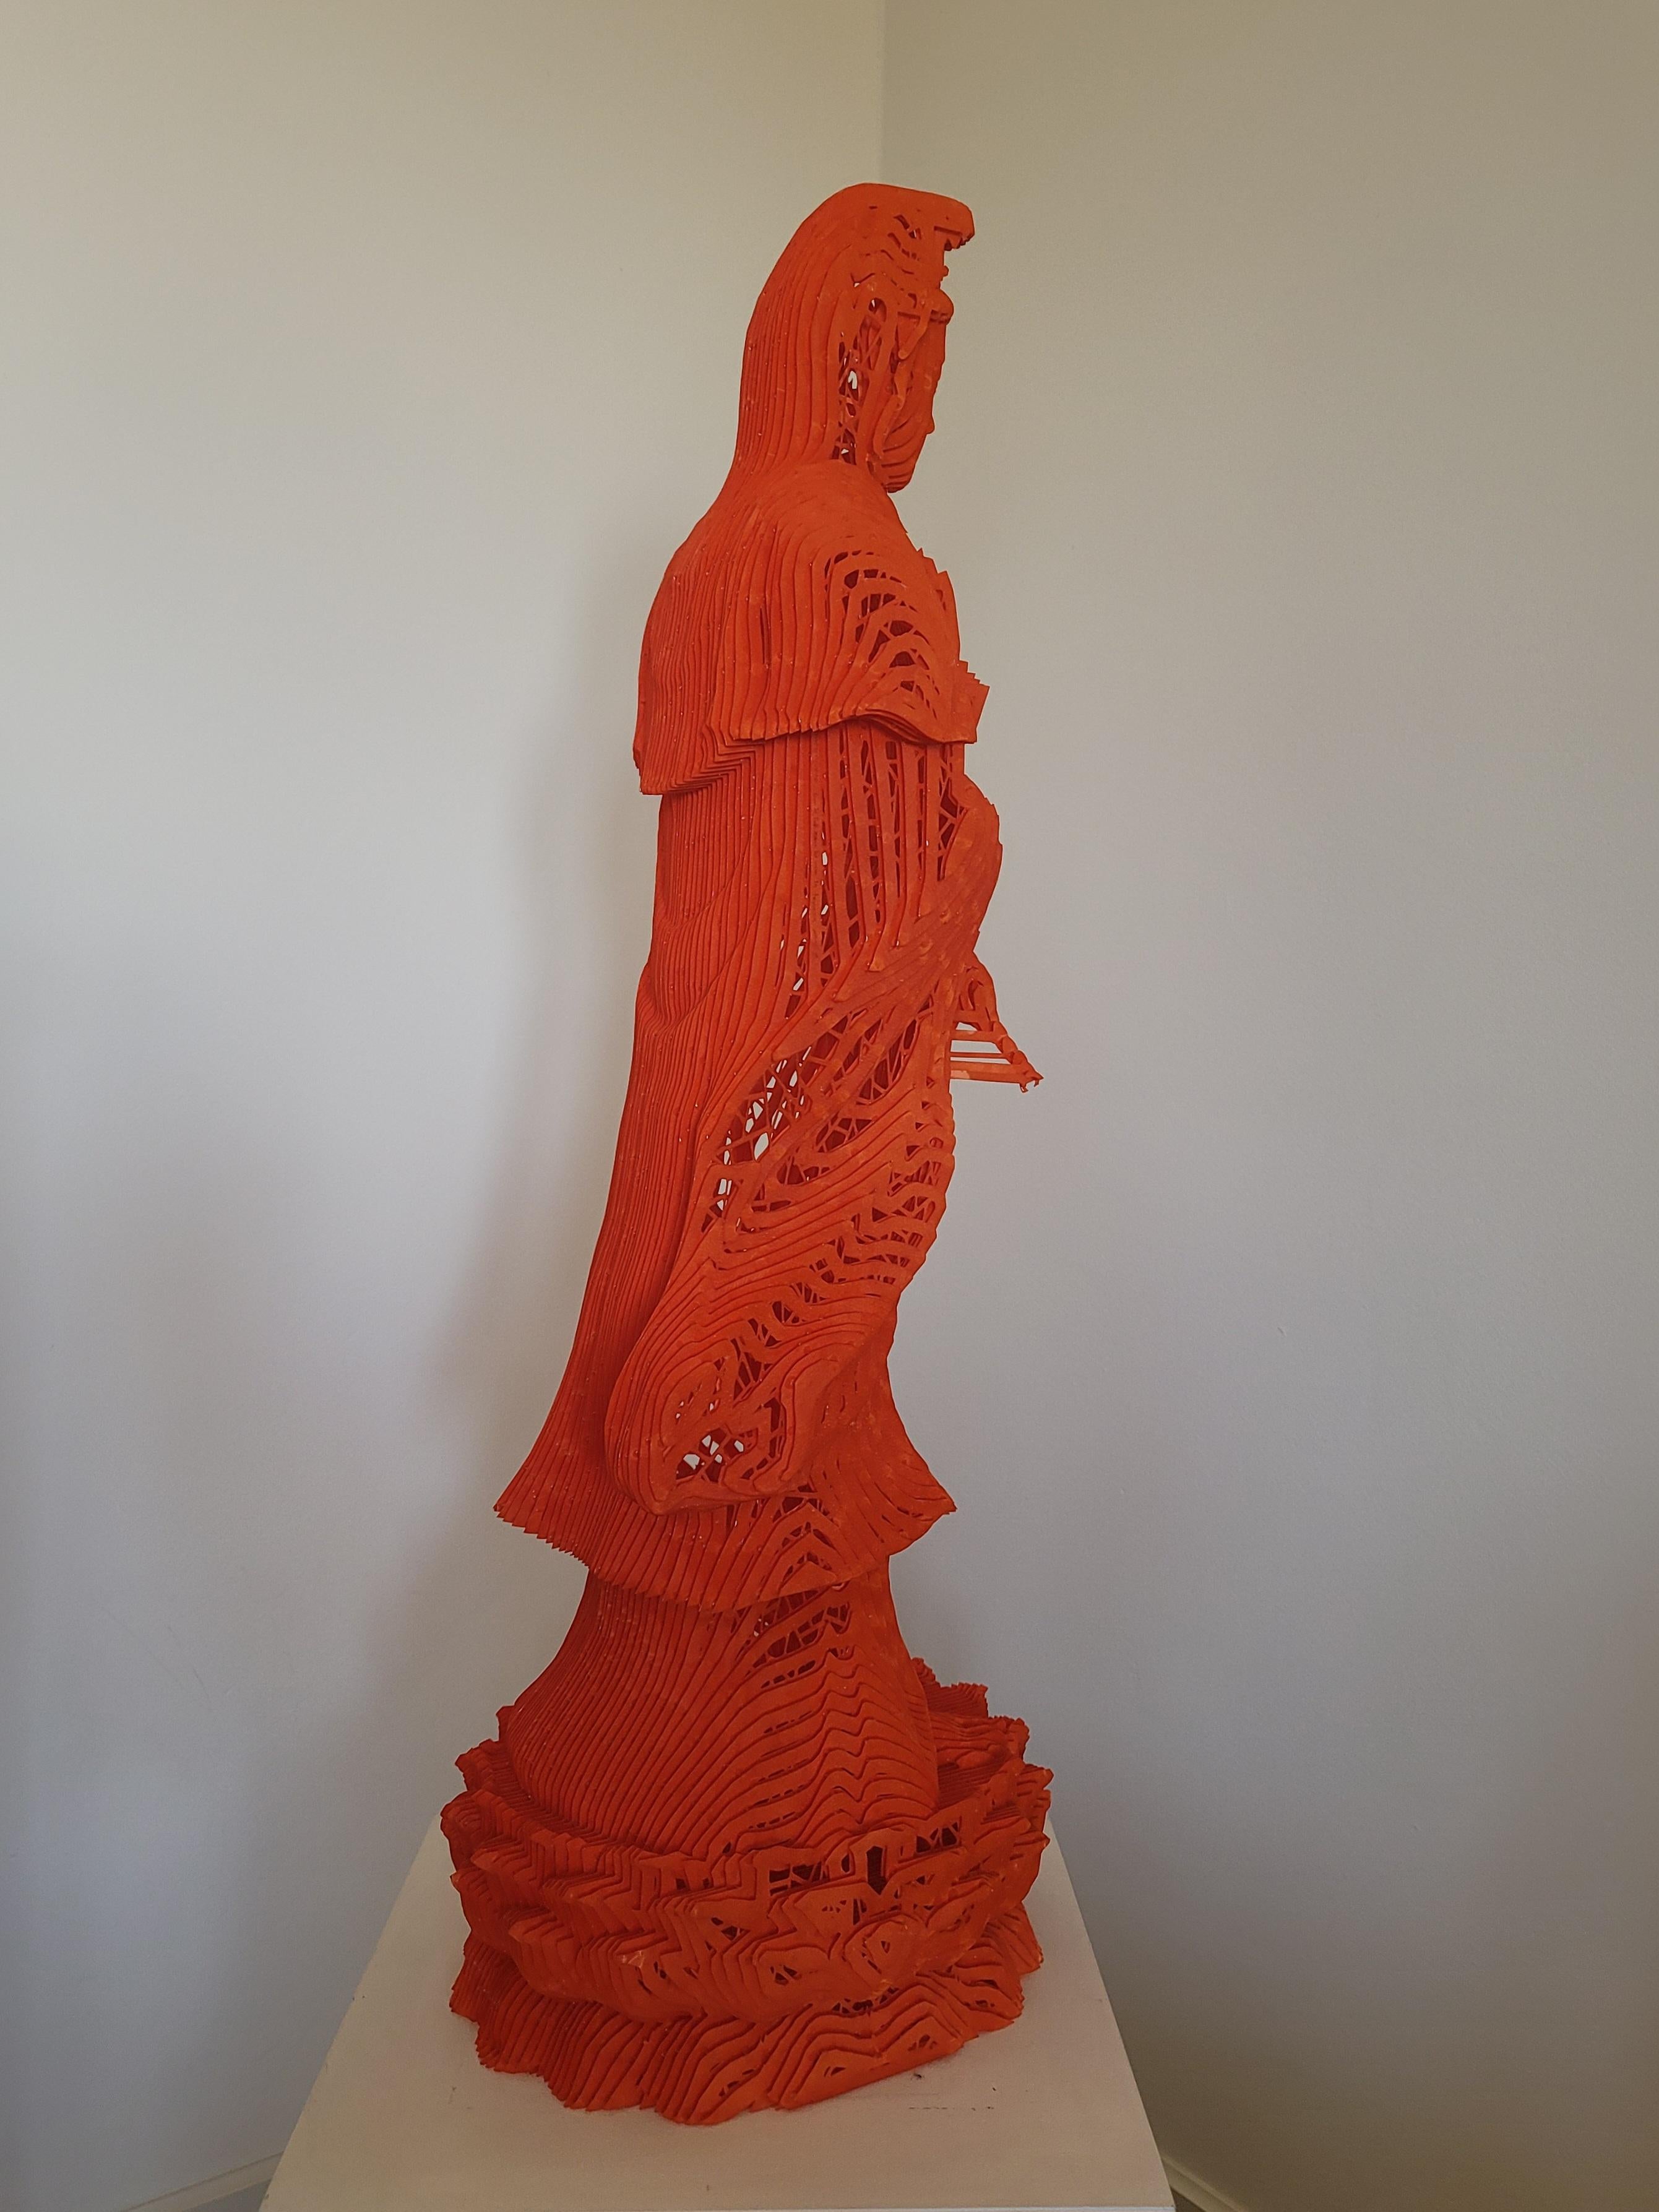 There is No Essence: Guan-In Bodhisattva, RED - Pop Art Sculpture by Shin Ho Yoon